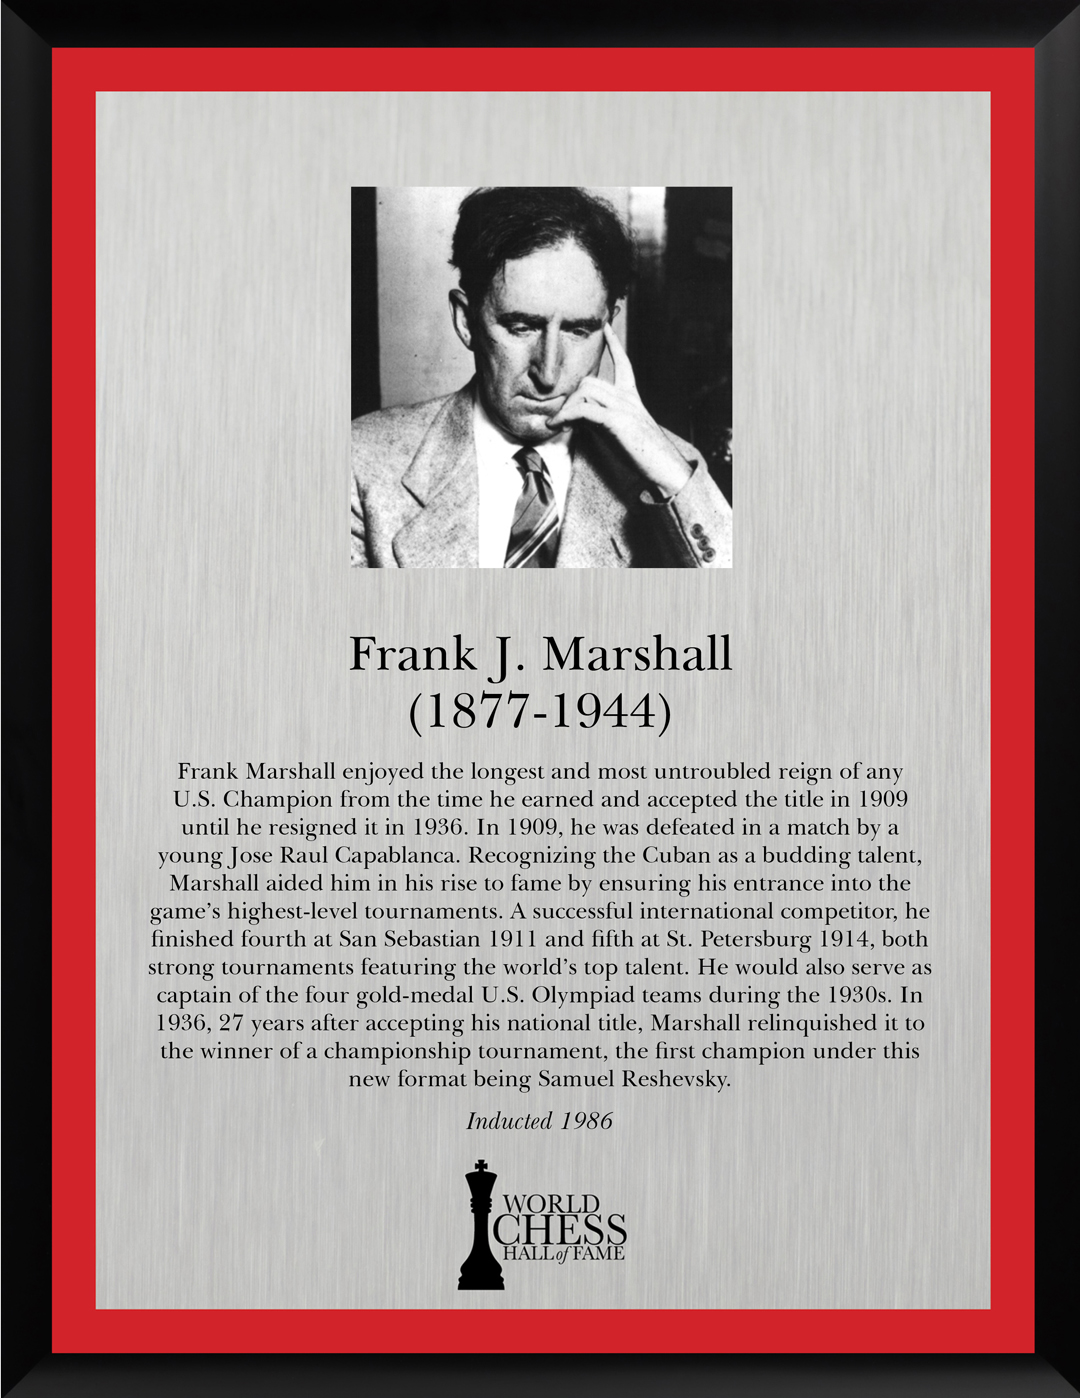 Americans playing for the title: Frank Marshall